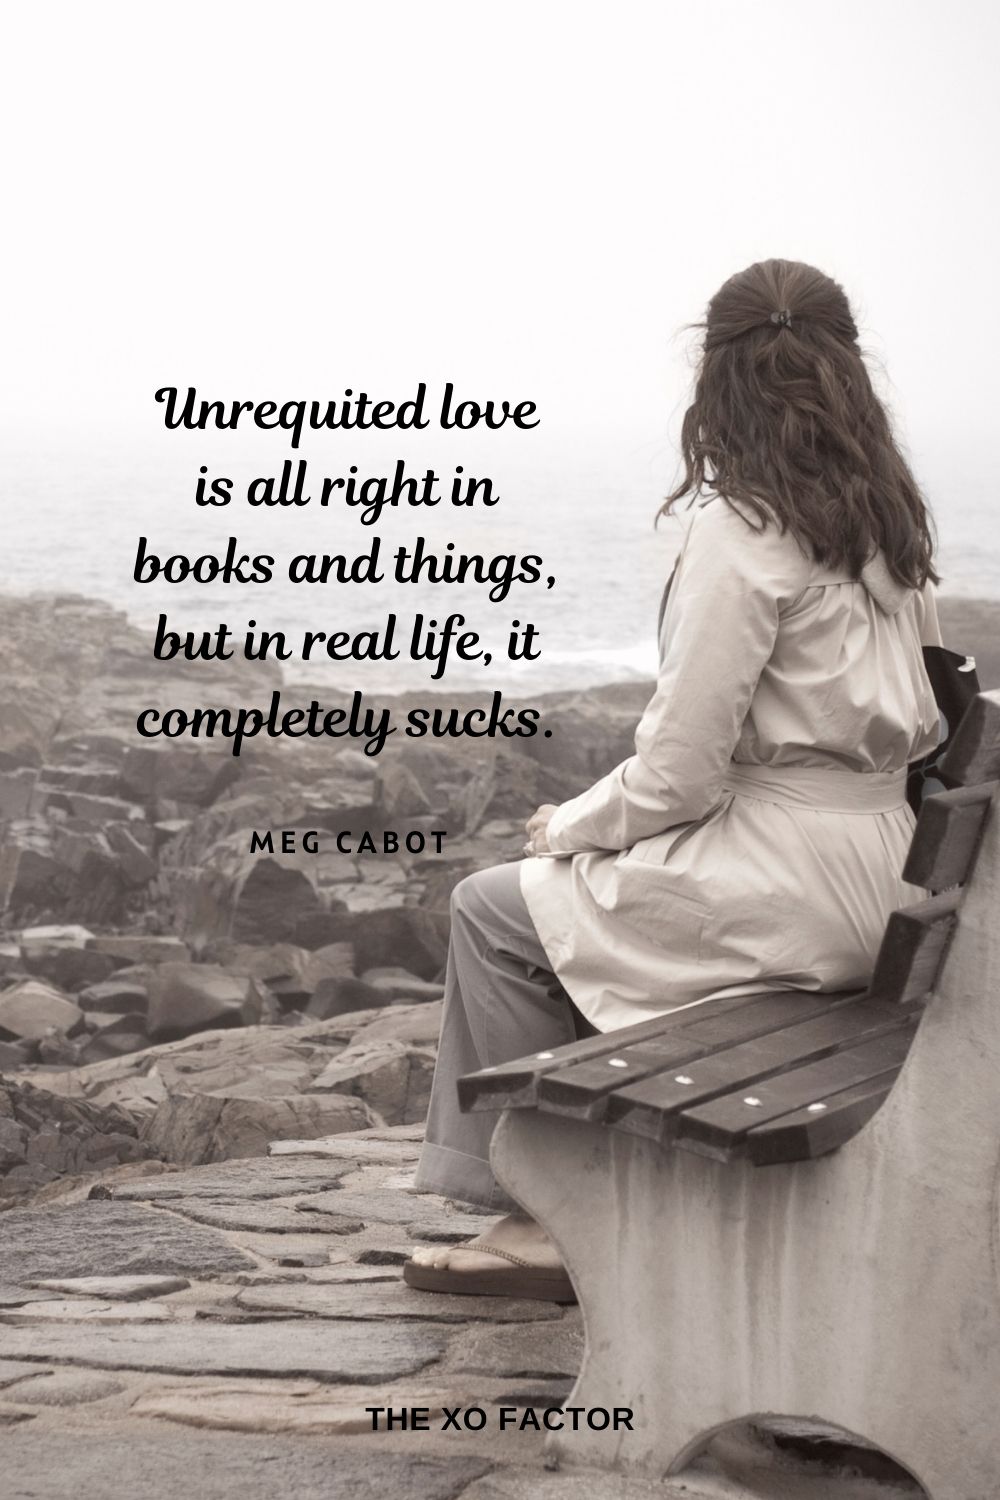 Unrequited love is all right in books and things, but in real life, it completely sucks. Meg Cabot